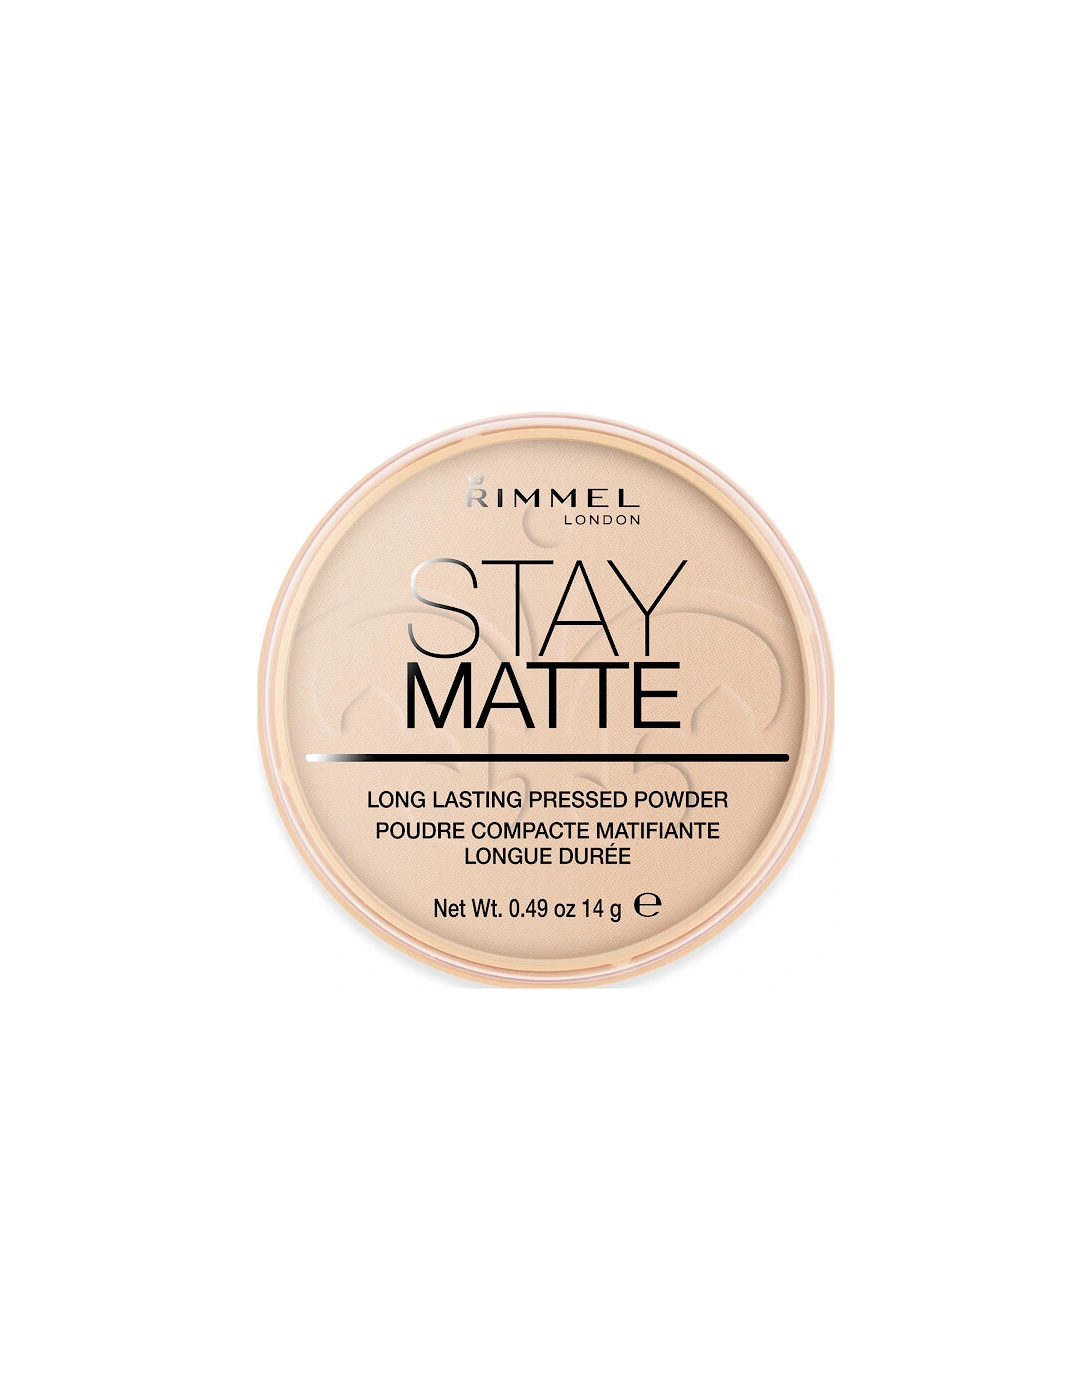 Stay Matte Pressed Powder - Pink Blossom - - Stay Matte Pressed Powder - Peach Glow - Stay Matte Pressed Powder - Silky Beige - Stay Matte Pressed Powder - Warm Beige - Stay Matte Pressed Powder - Pink Blossom - Stay Matte Pressed Powder - Peach Glow - Stay Matte Pressed Powder - Sandstorm - Stay Matte Pressed Powder - Silky Beige - Stay Matte Pressed Powder - Warm Beige, 2 of 1